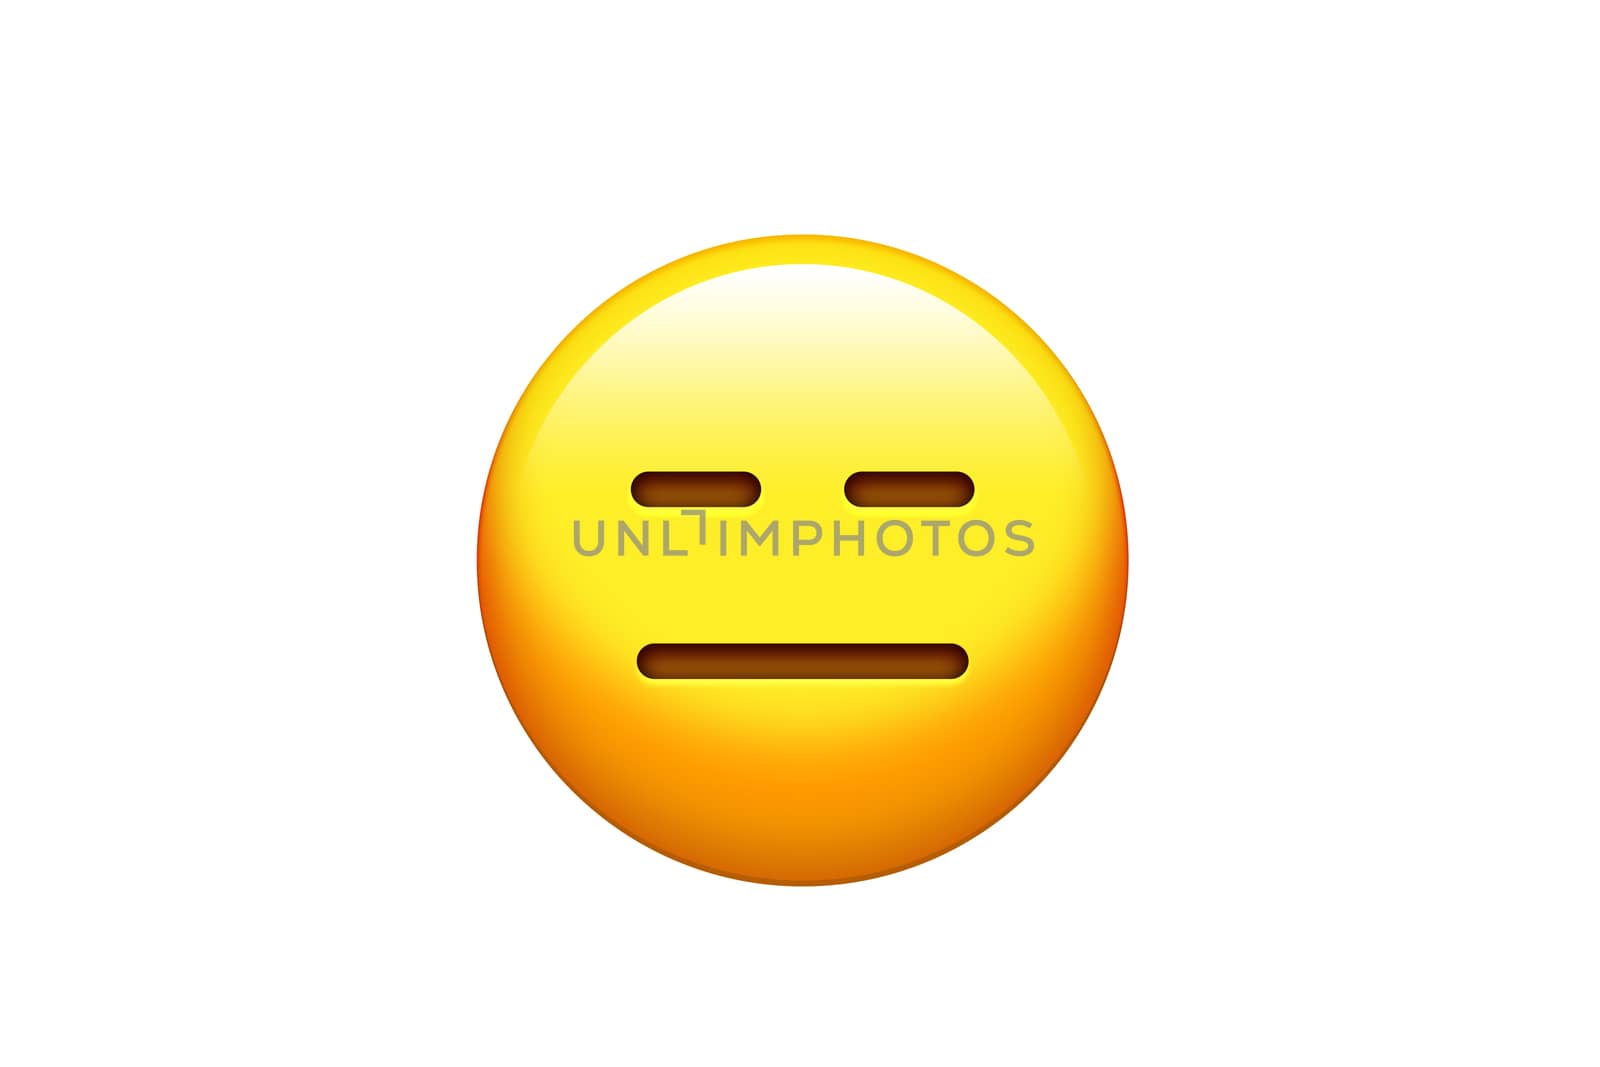 The isolated emoji yellow frown troubled look face icon